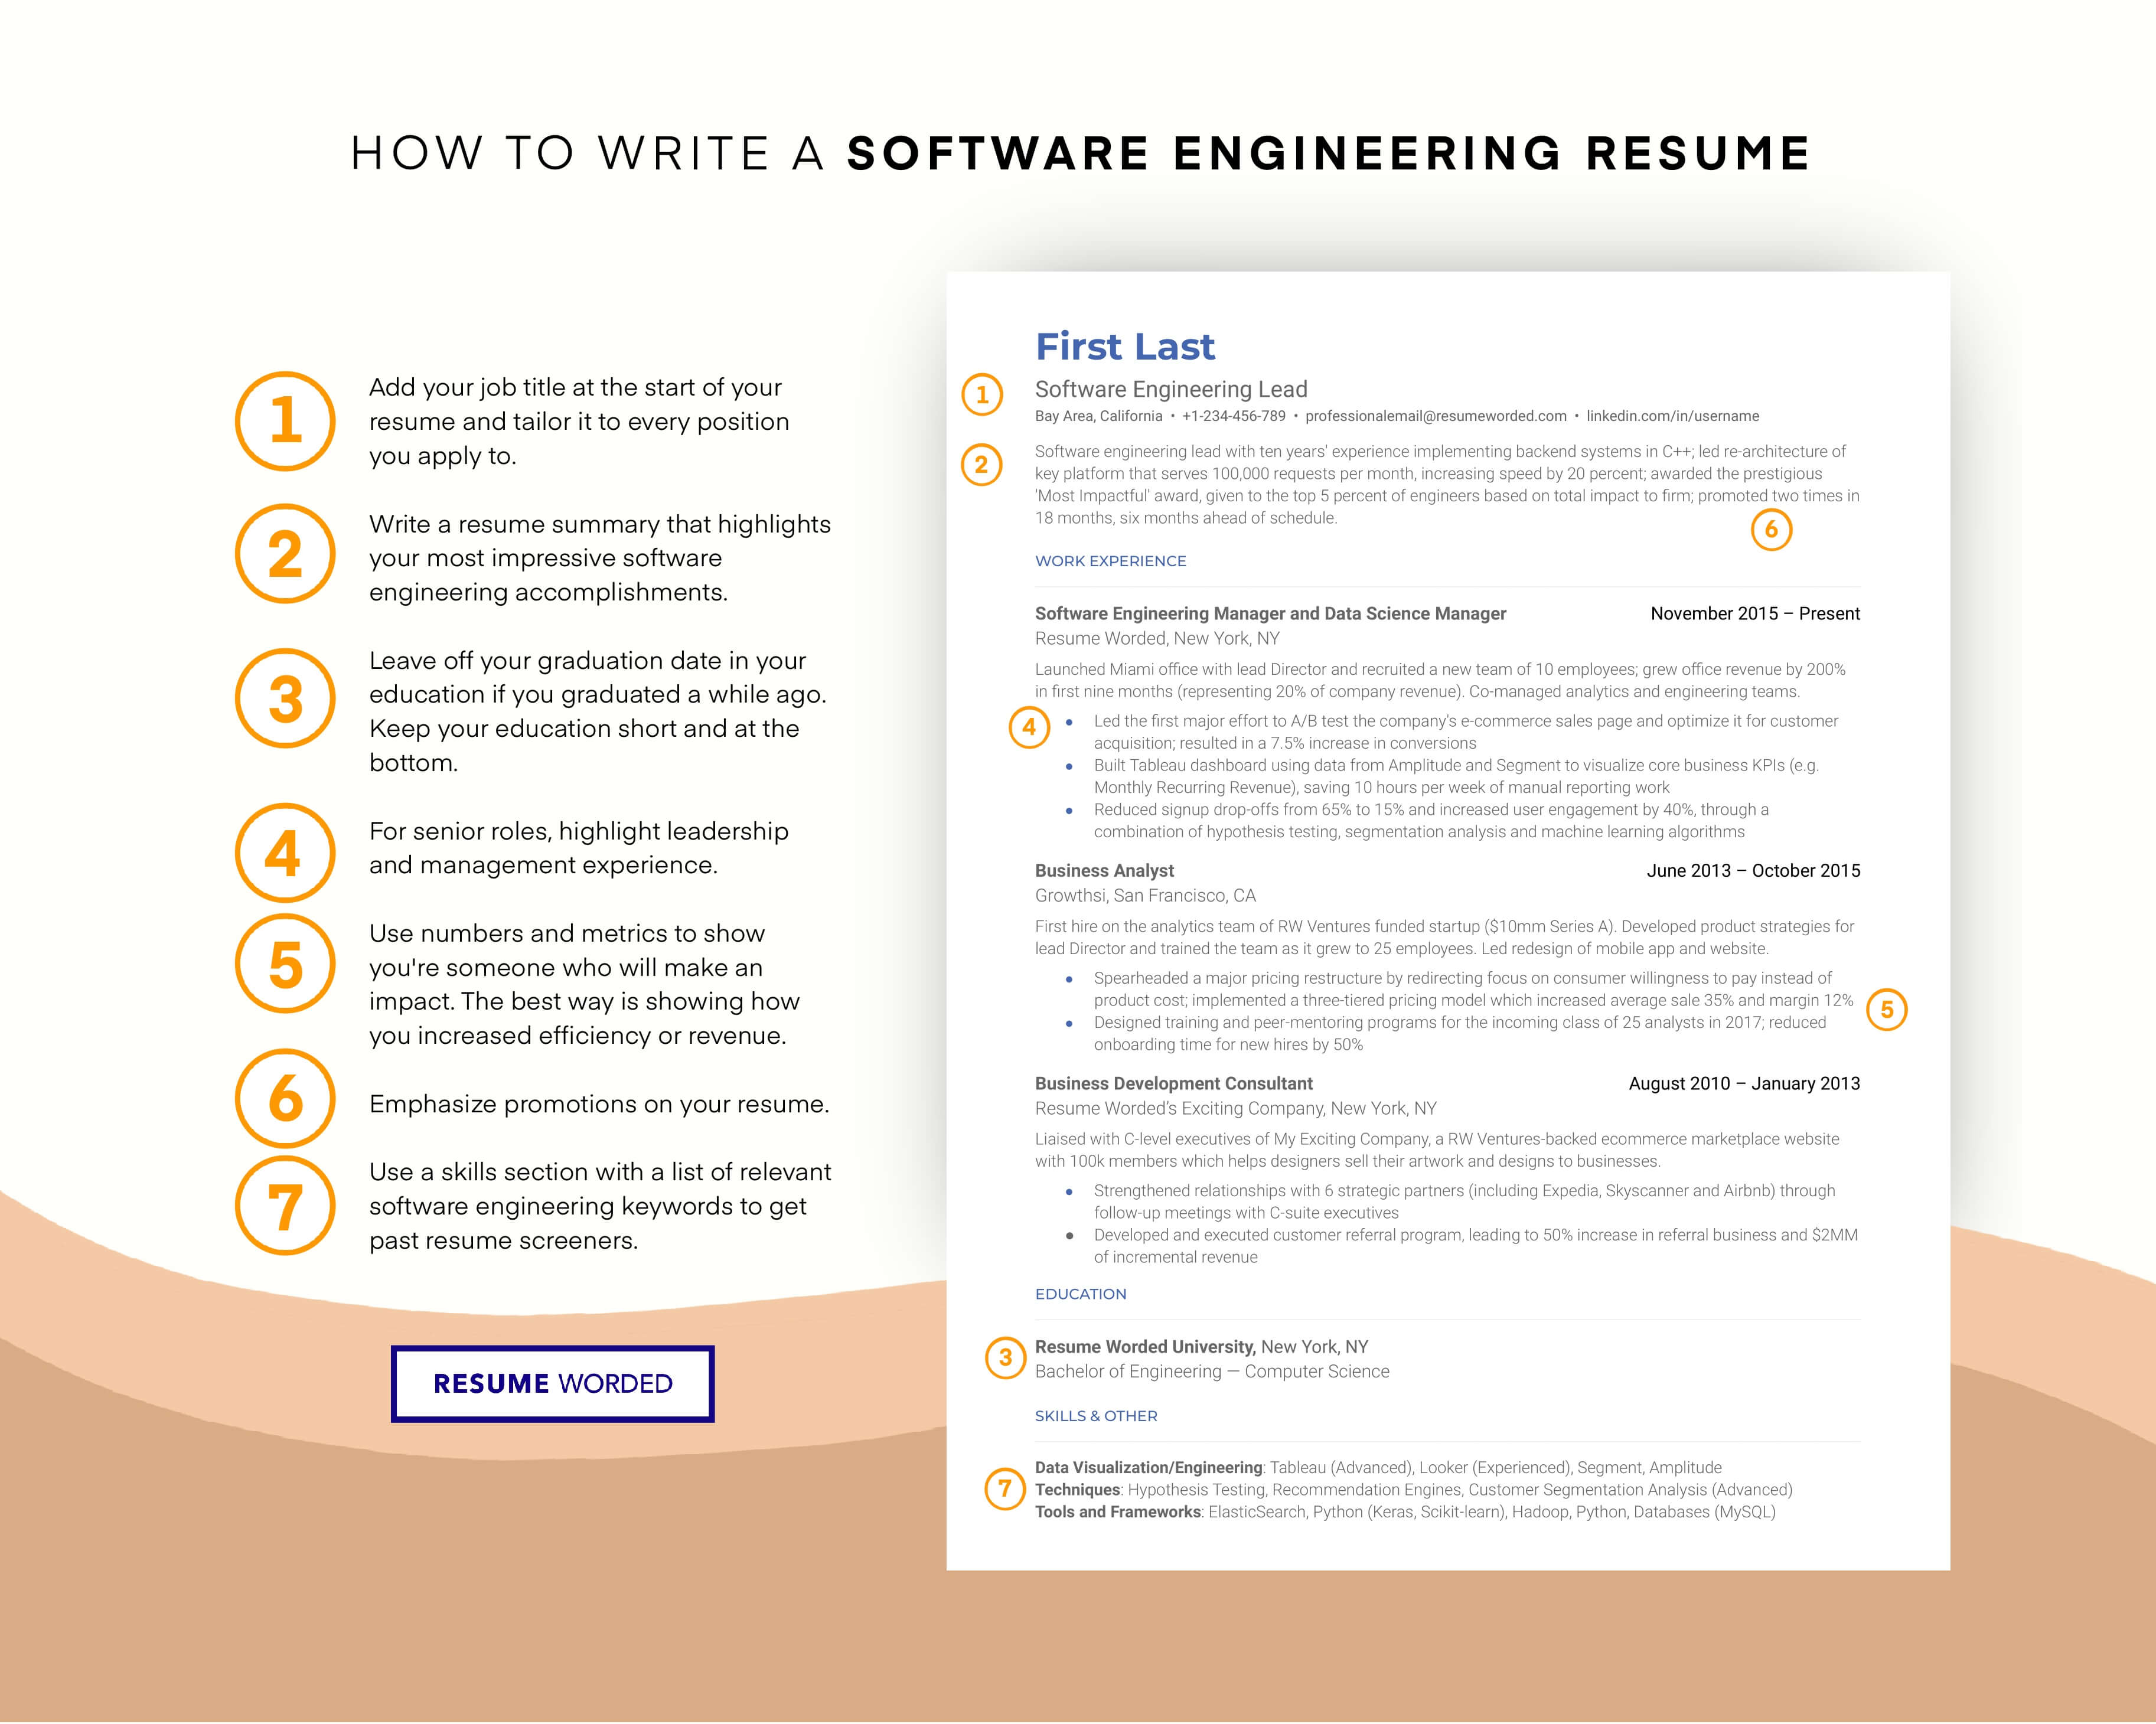 Mention some of the programming languages you’re proficient at. - AWS Cloud Engineer Resume